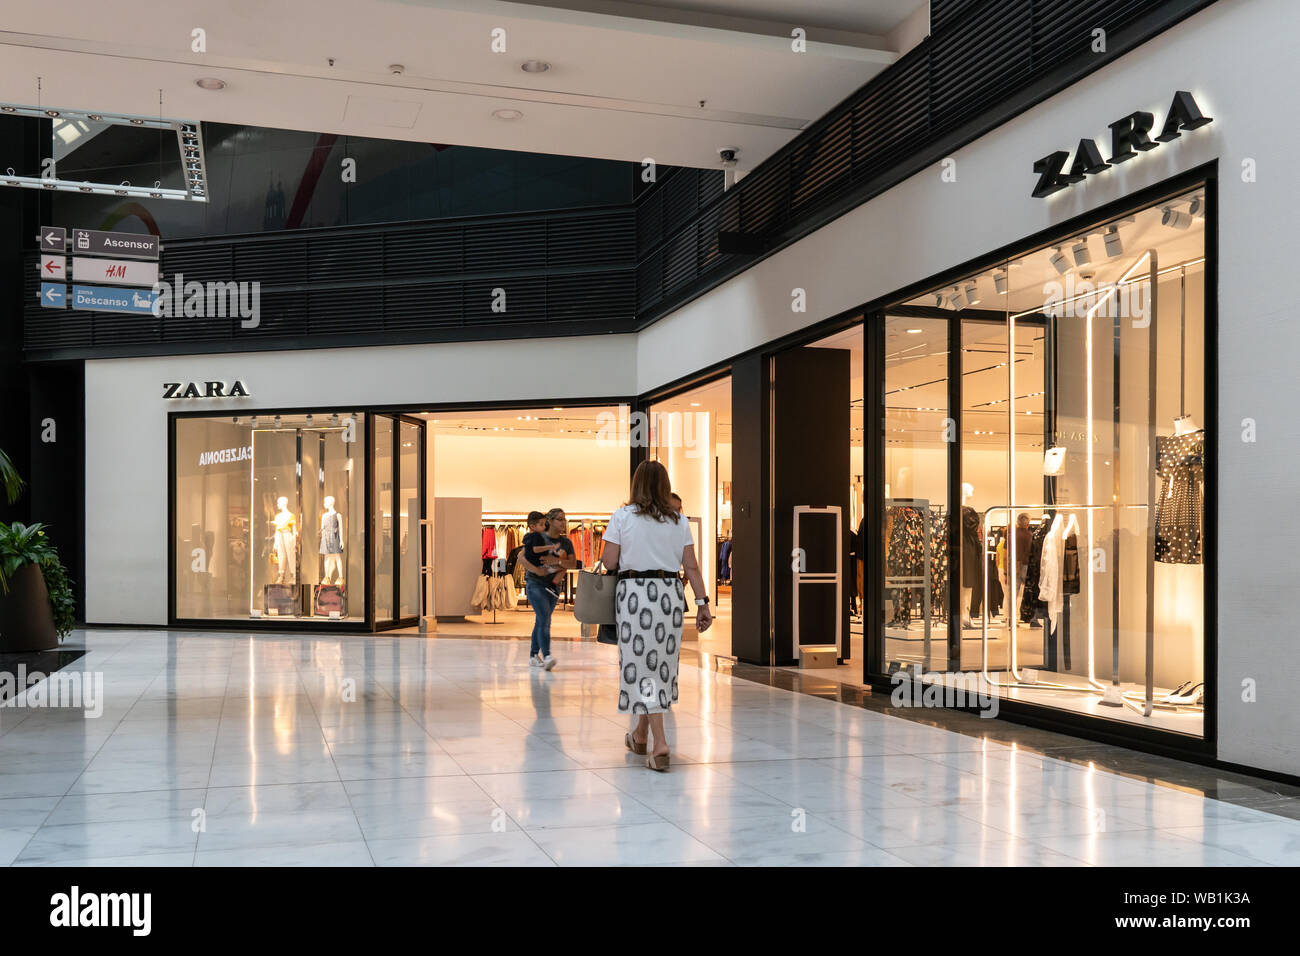 Page 3 - Zara Sign High Resolution Stock Photography and Images - Alamy